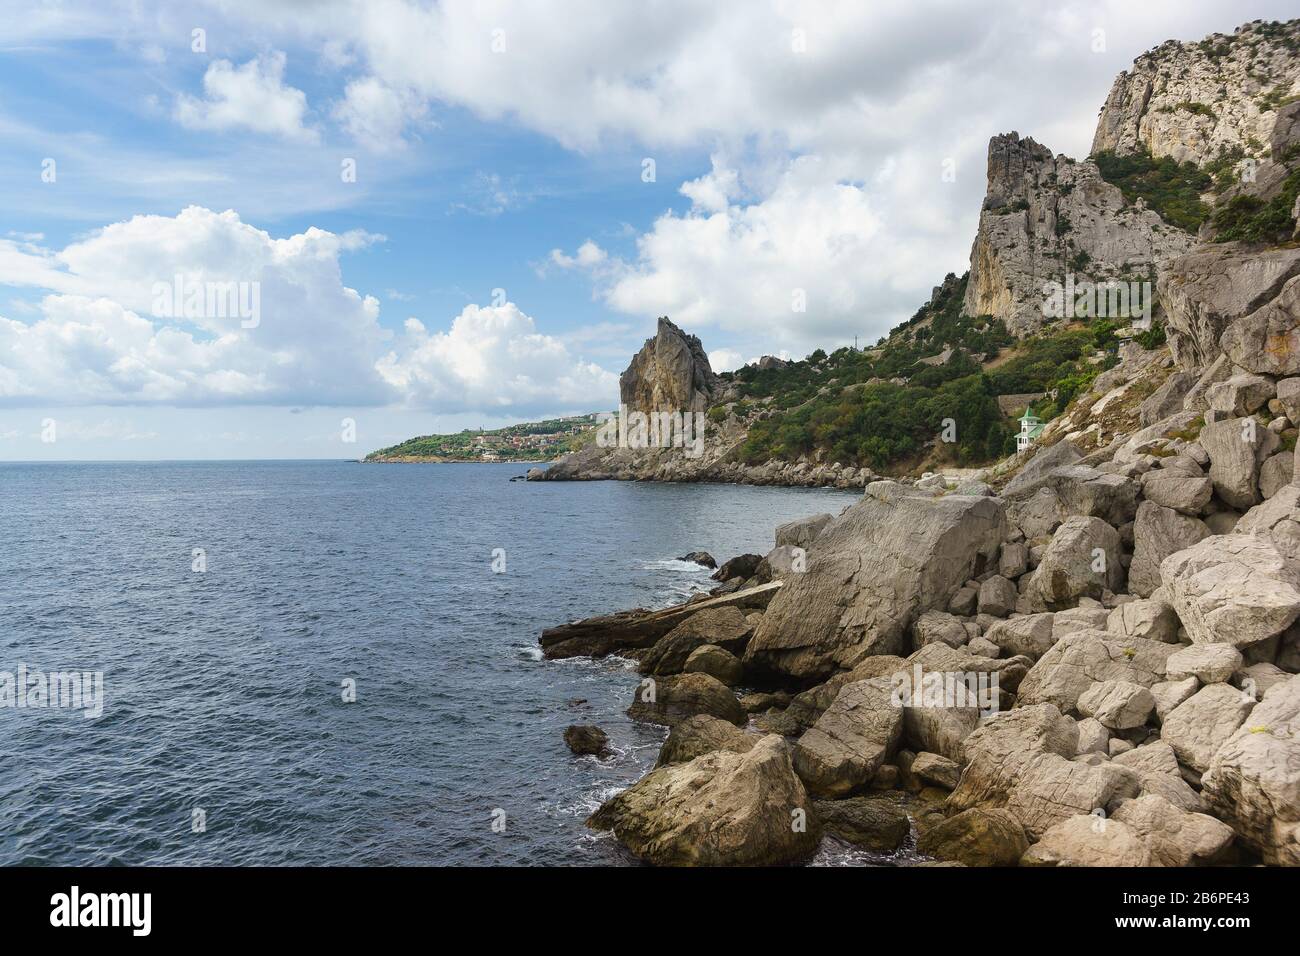 Southern coast of Crimea on a Sunny day. Rocks and mountain Cat in the village Simeiz, Yalta. Calm Stock Photo